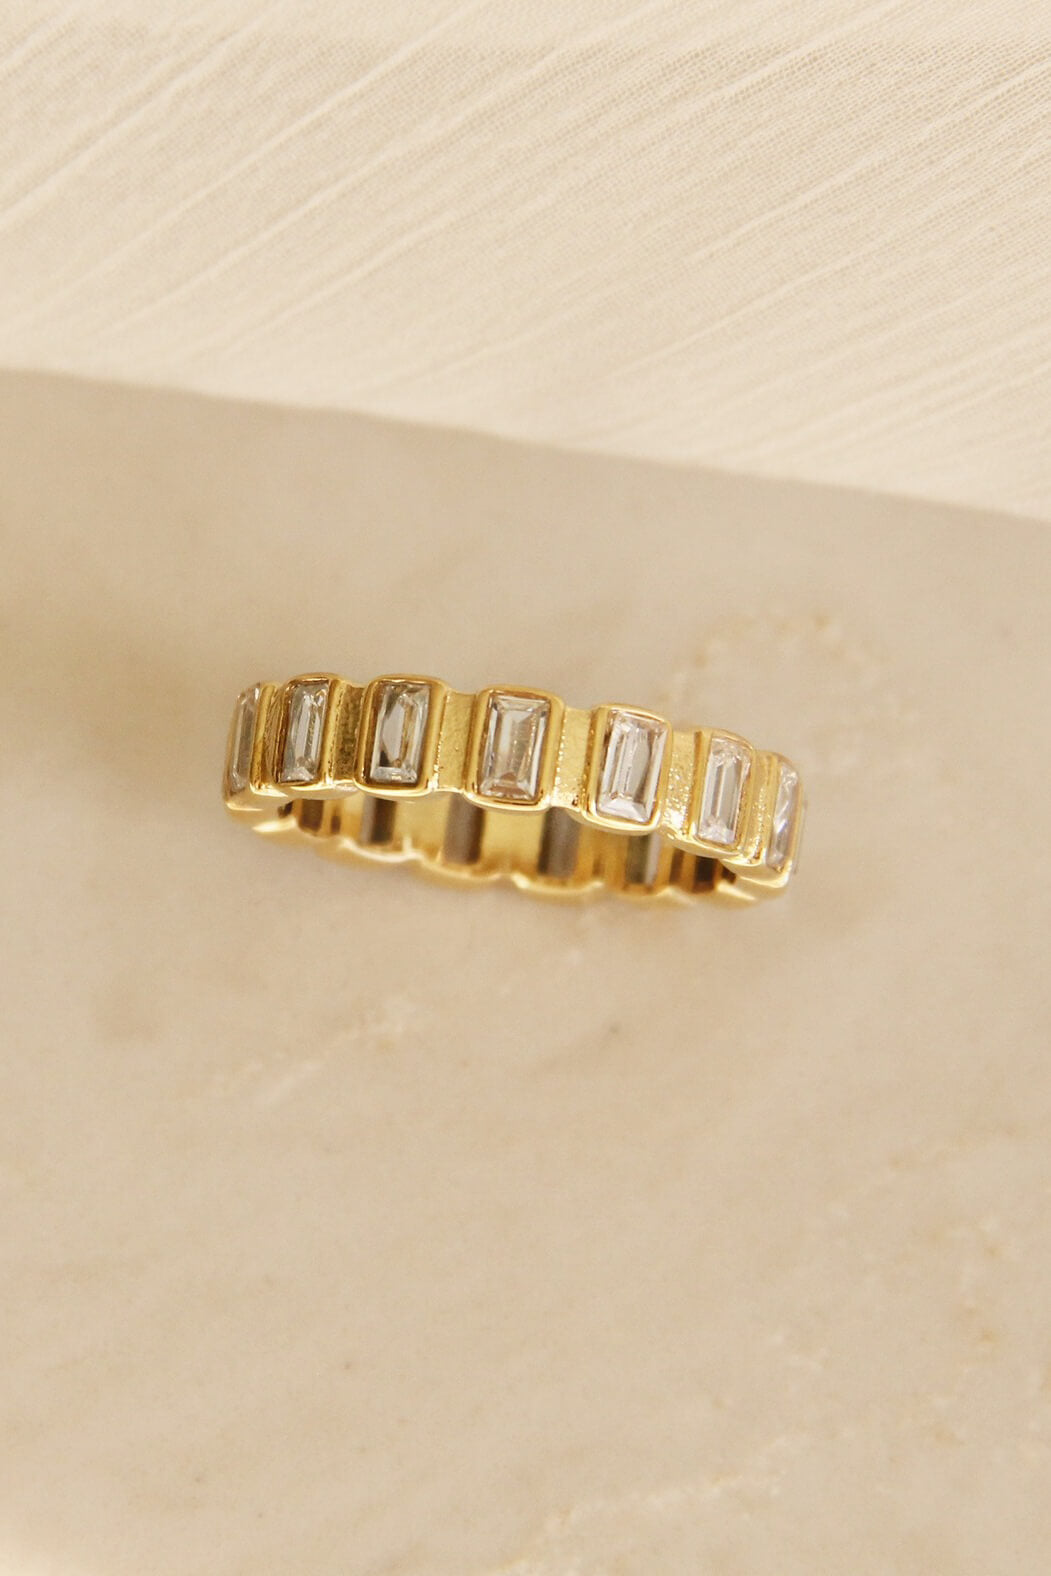 Maive Jewelry baguette eternity band ring